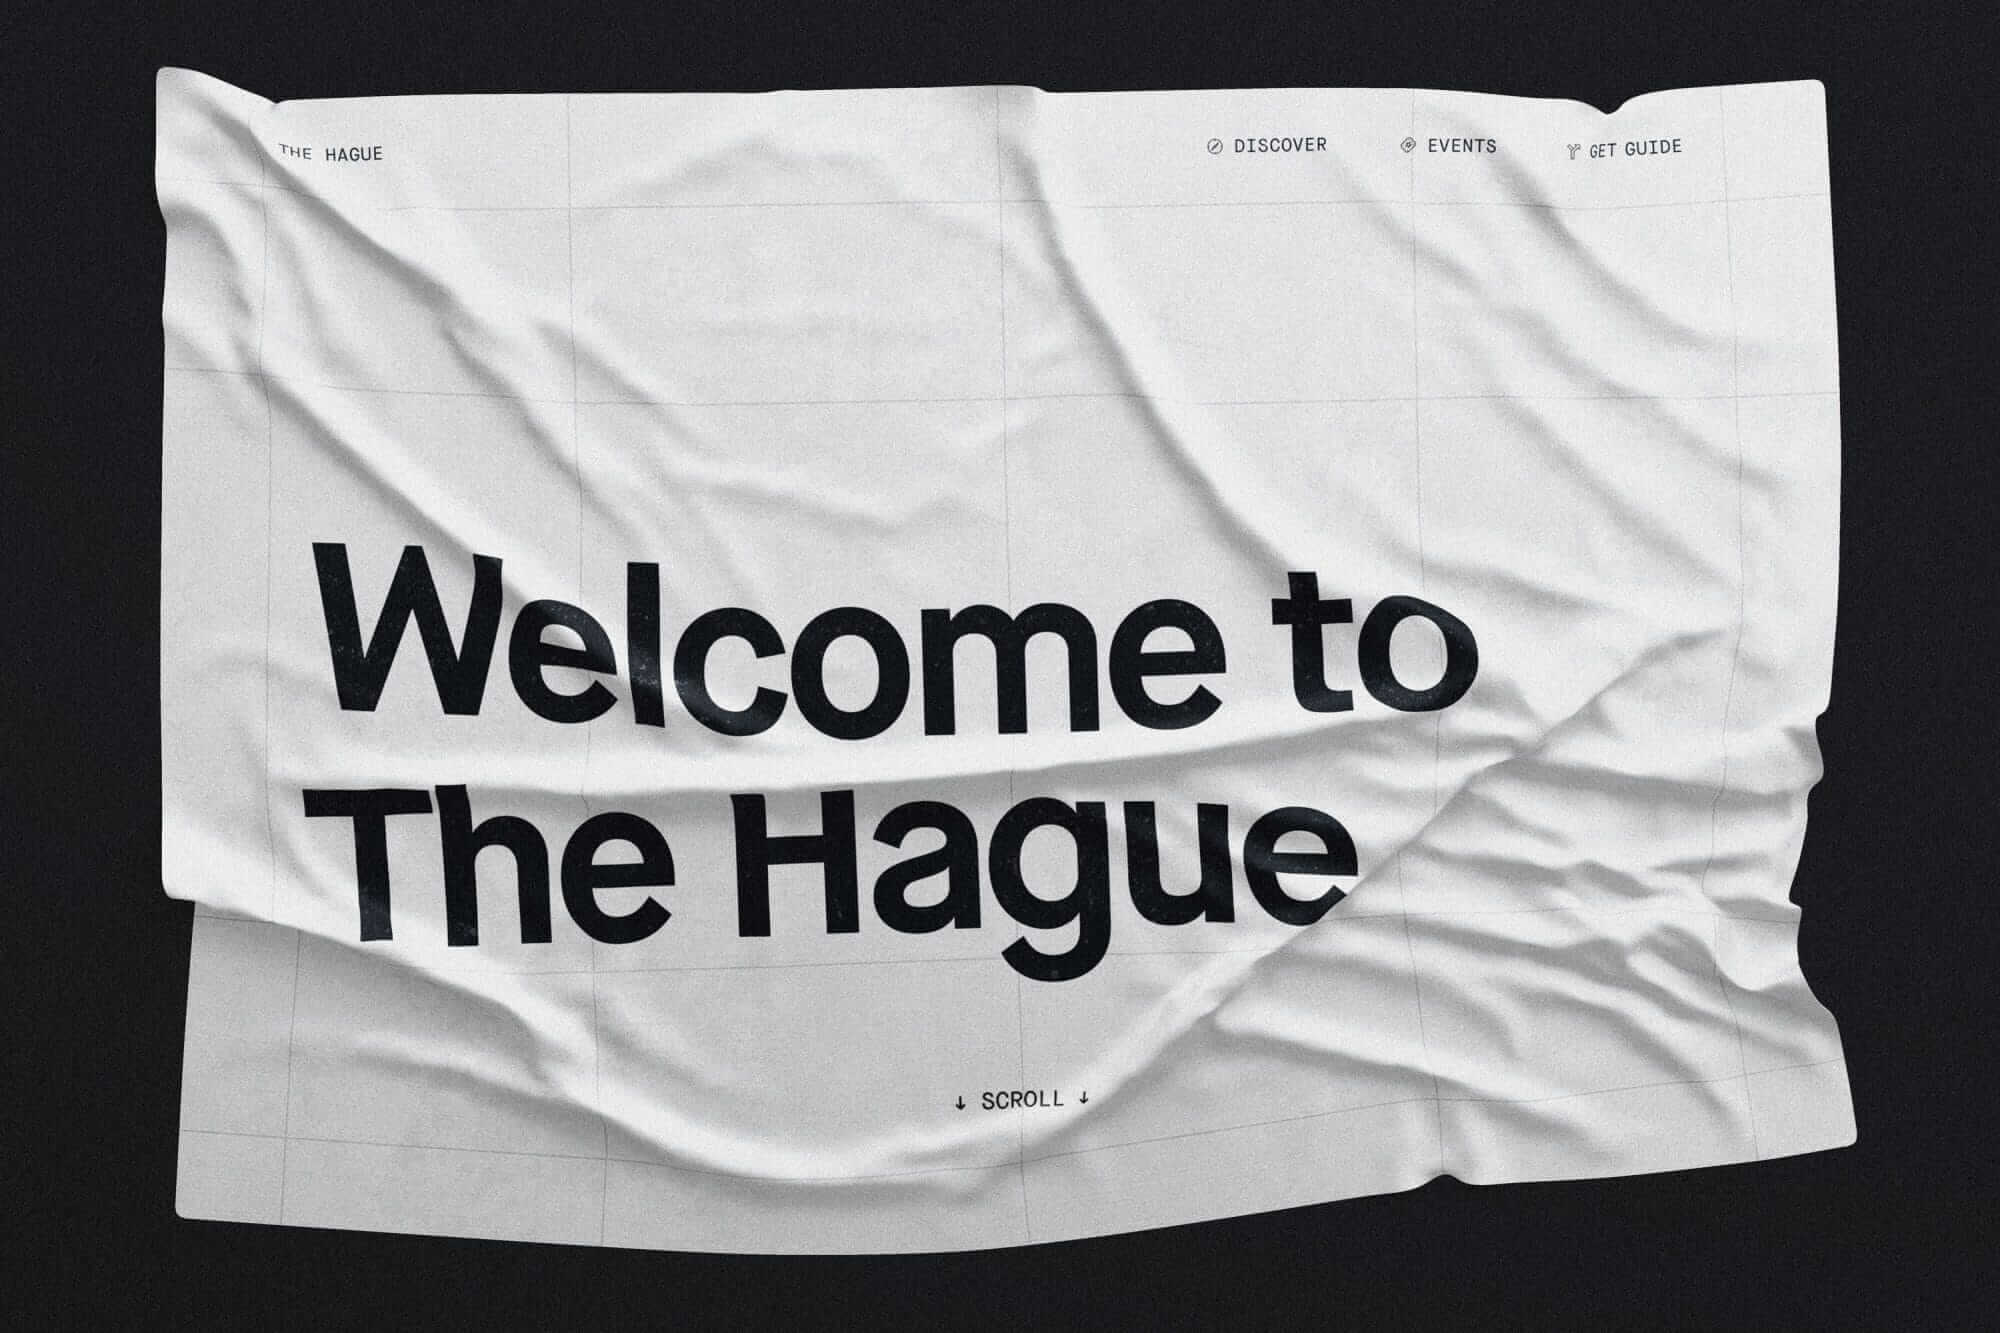 Welcome to The Hague